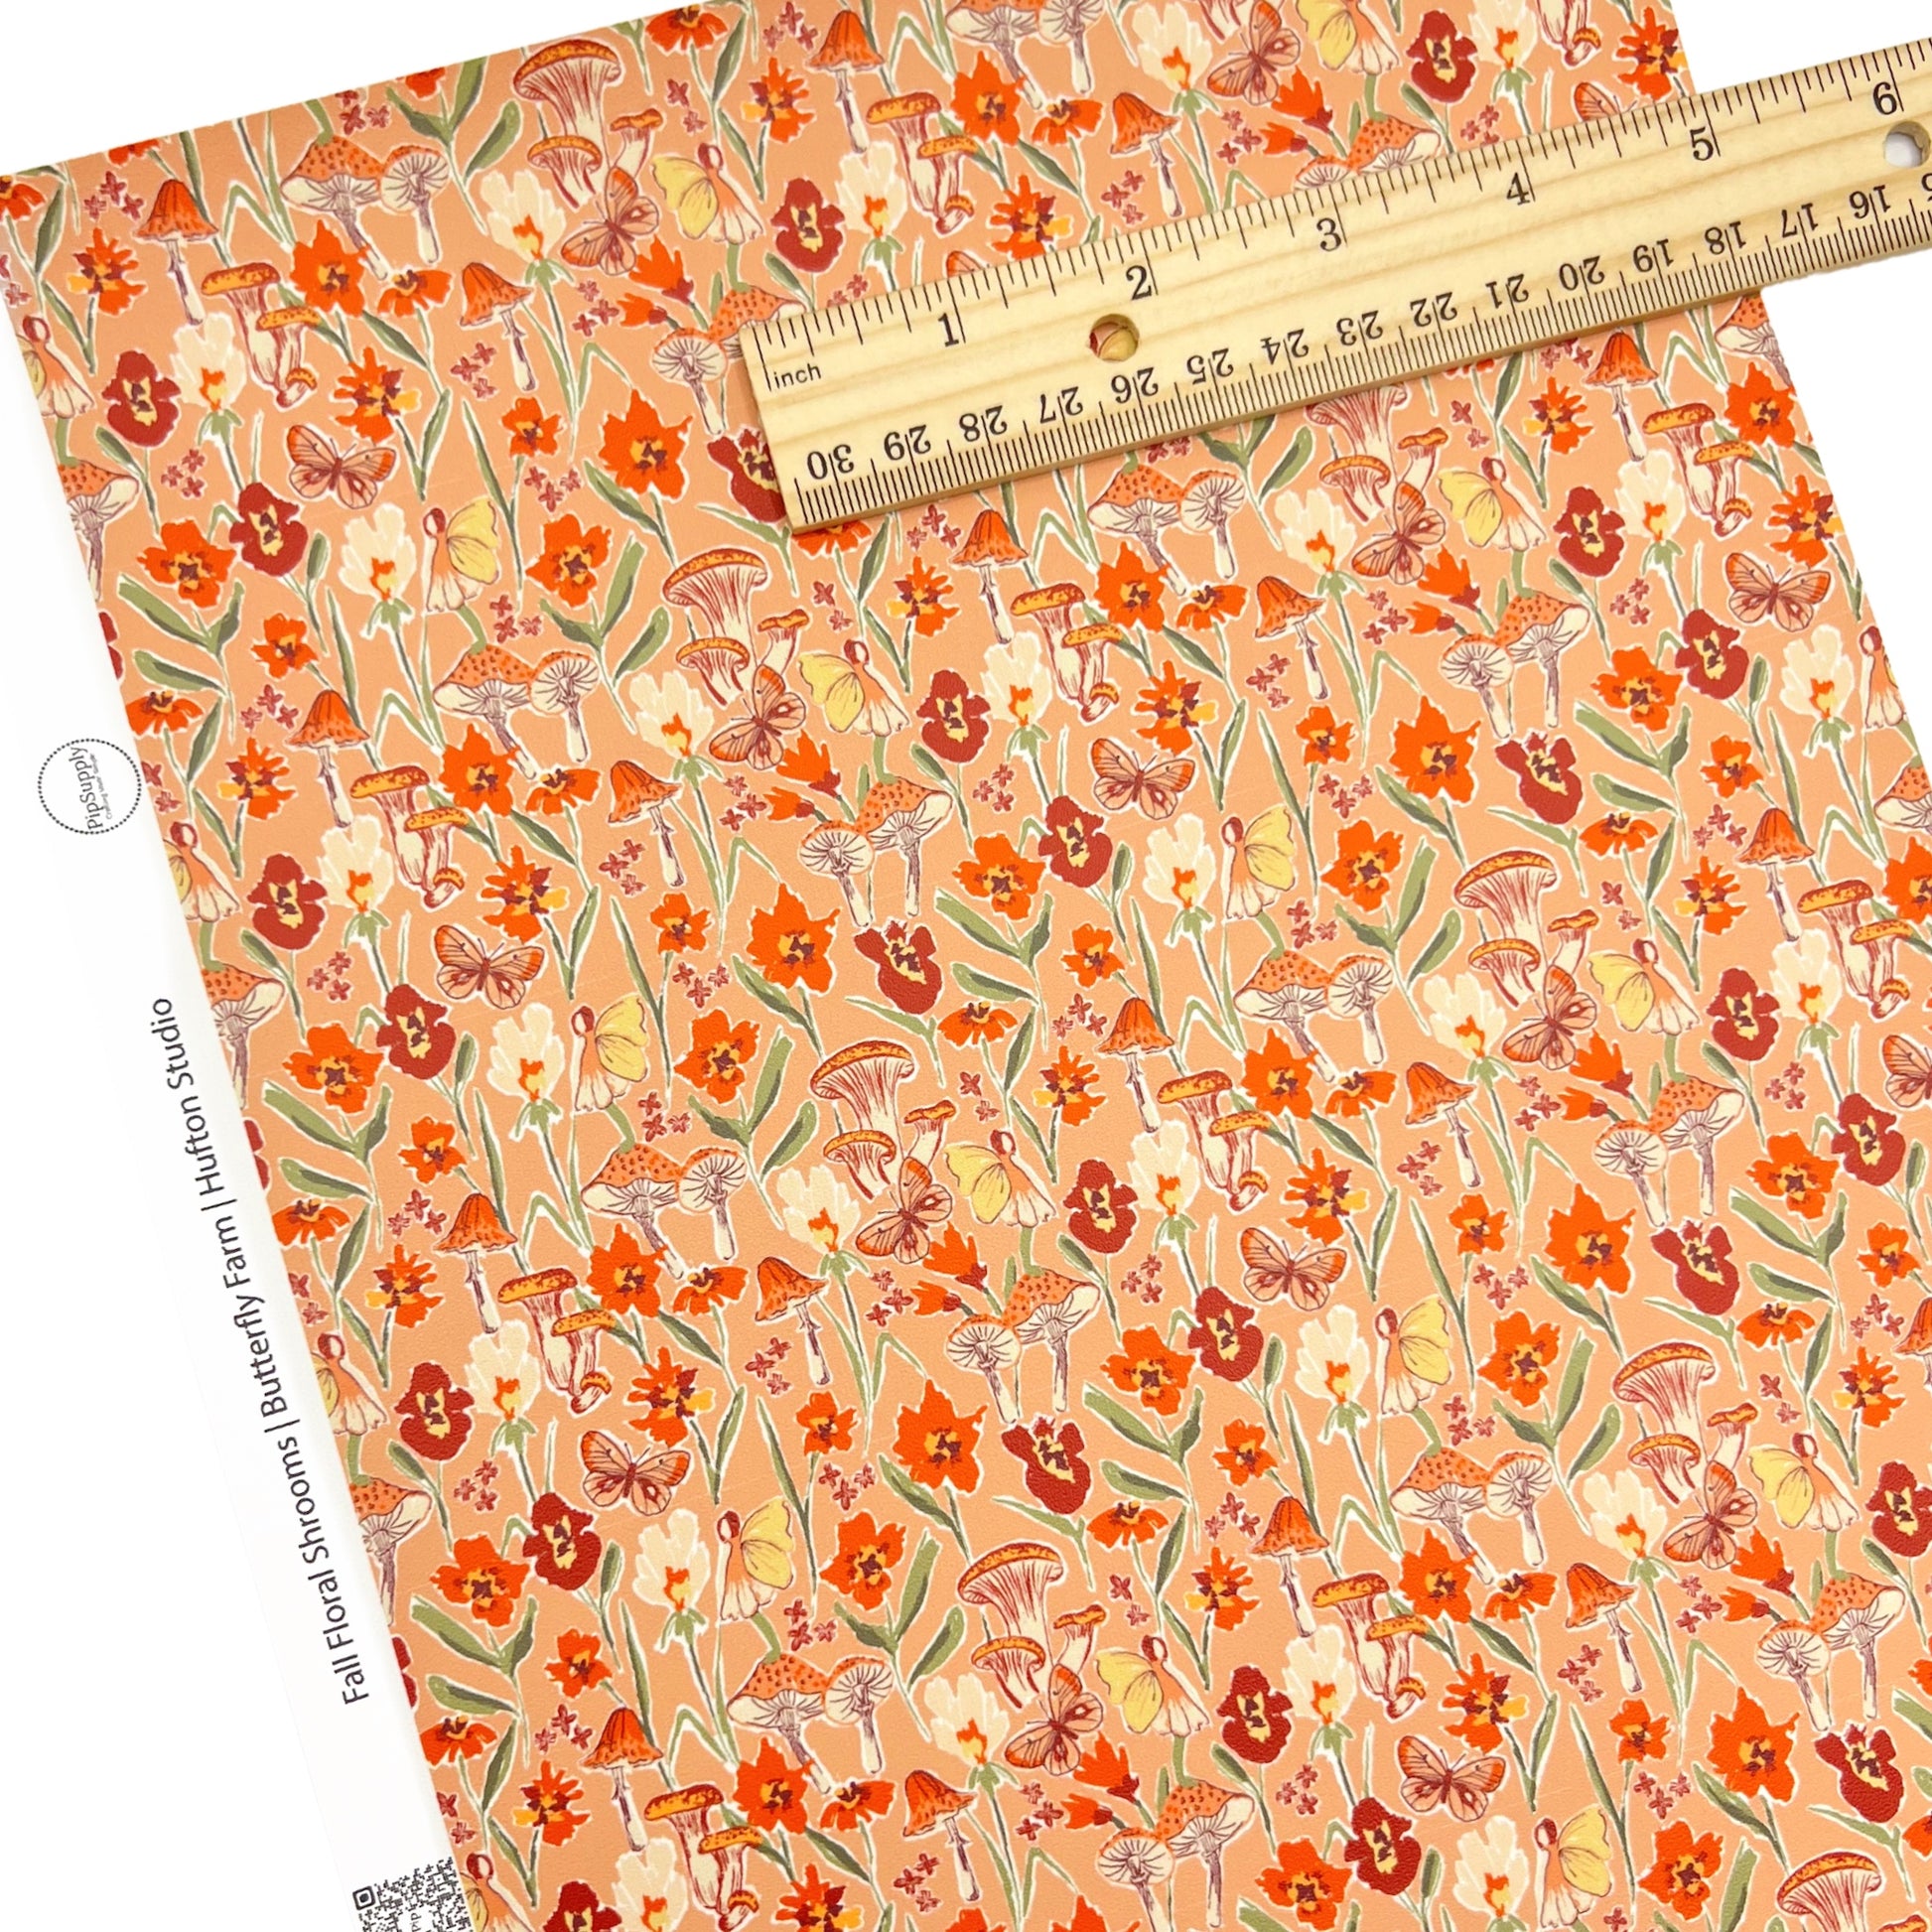 Orange colored faux leather sheets with multi colored flowers, butterflies,a nd mushrooms